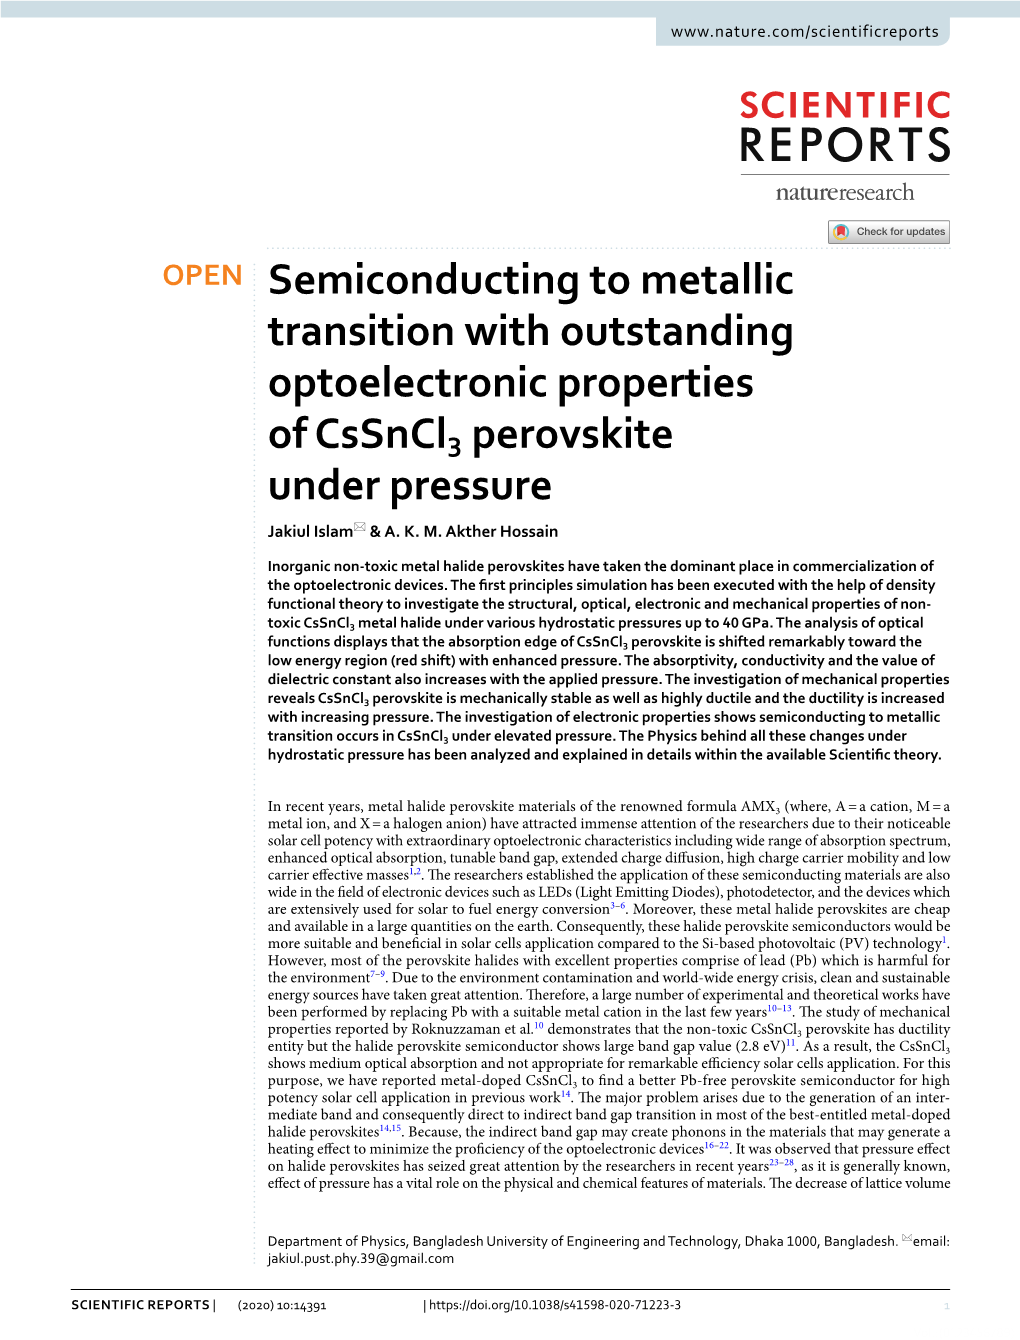 Semiconducting to Metallic Transition with Outstanding Optoelectronic Properties of C Ssncl3 Perovskite Under Pressure Jakiul Islam* & A